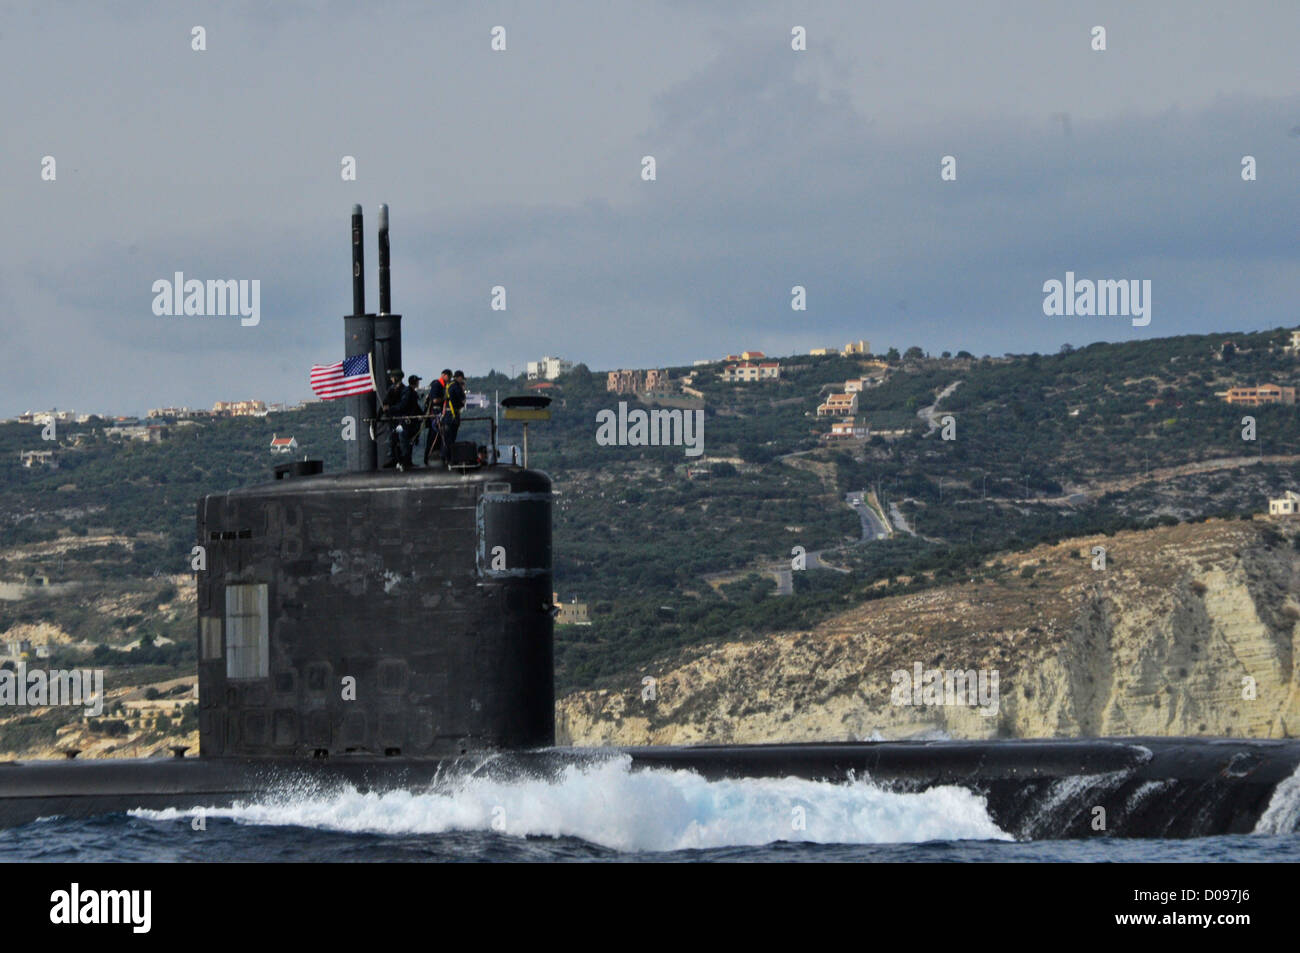 The Los Angeles-class fast attack submarine USS Alexandria (SSN 757) departs following a scheduled port visit. Alexandria is homeported in Groton, Conn. and currently deployed conducting maritime security operations and theater security cooperation effort Stock Photo